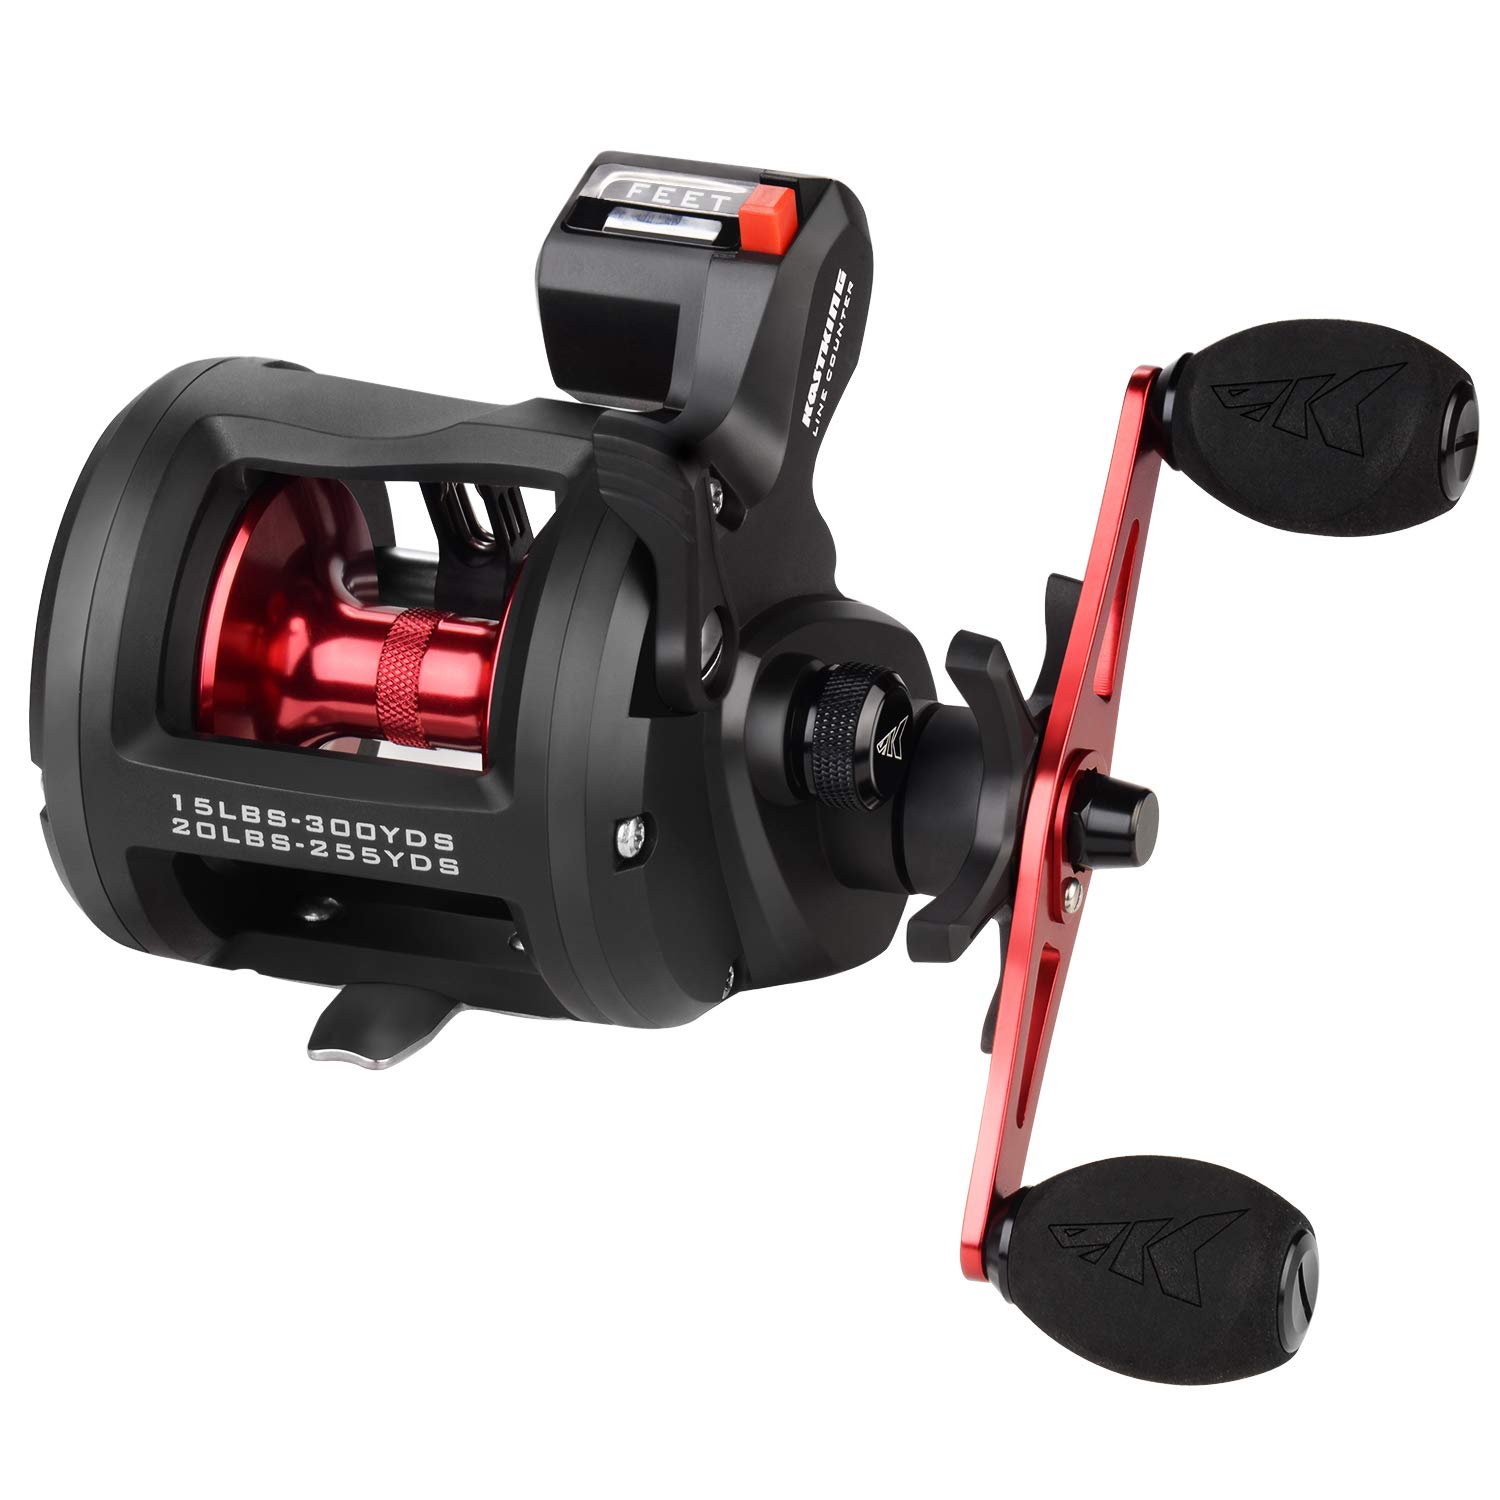 Electronic Fishing Baitcasting Reel with Accurate Line Counter